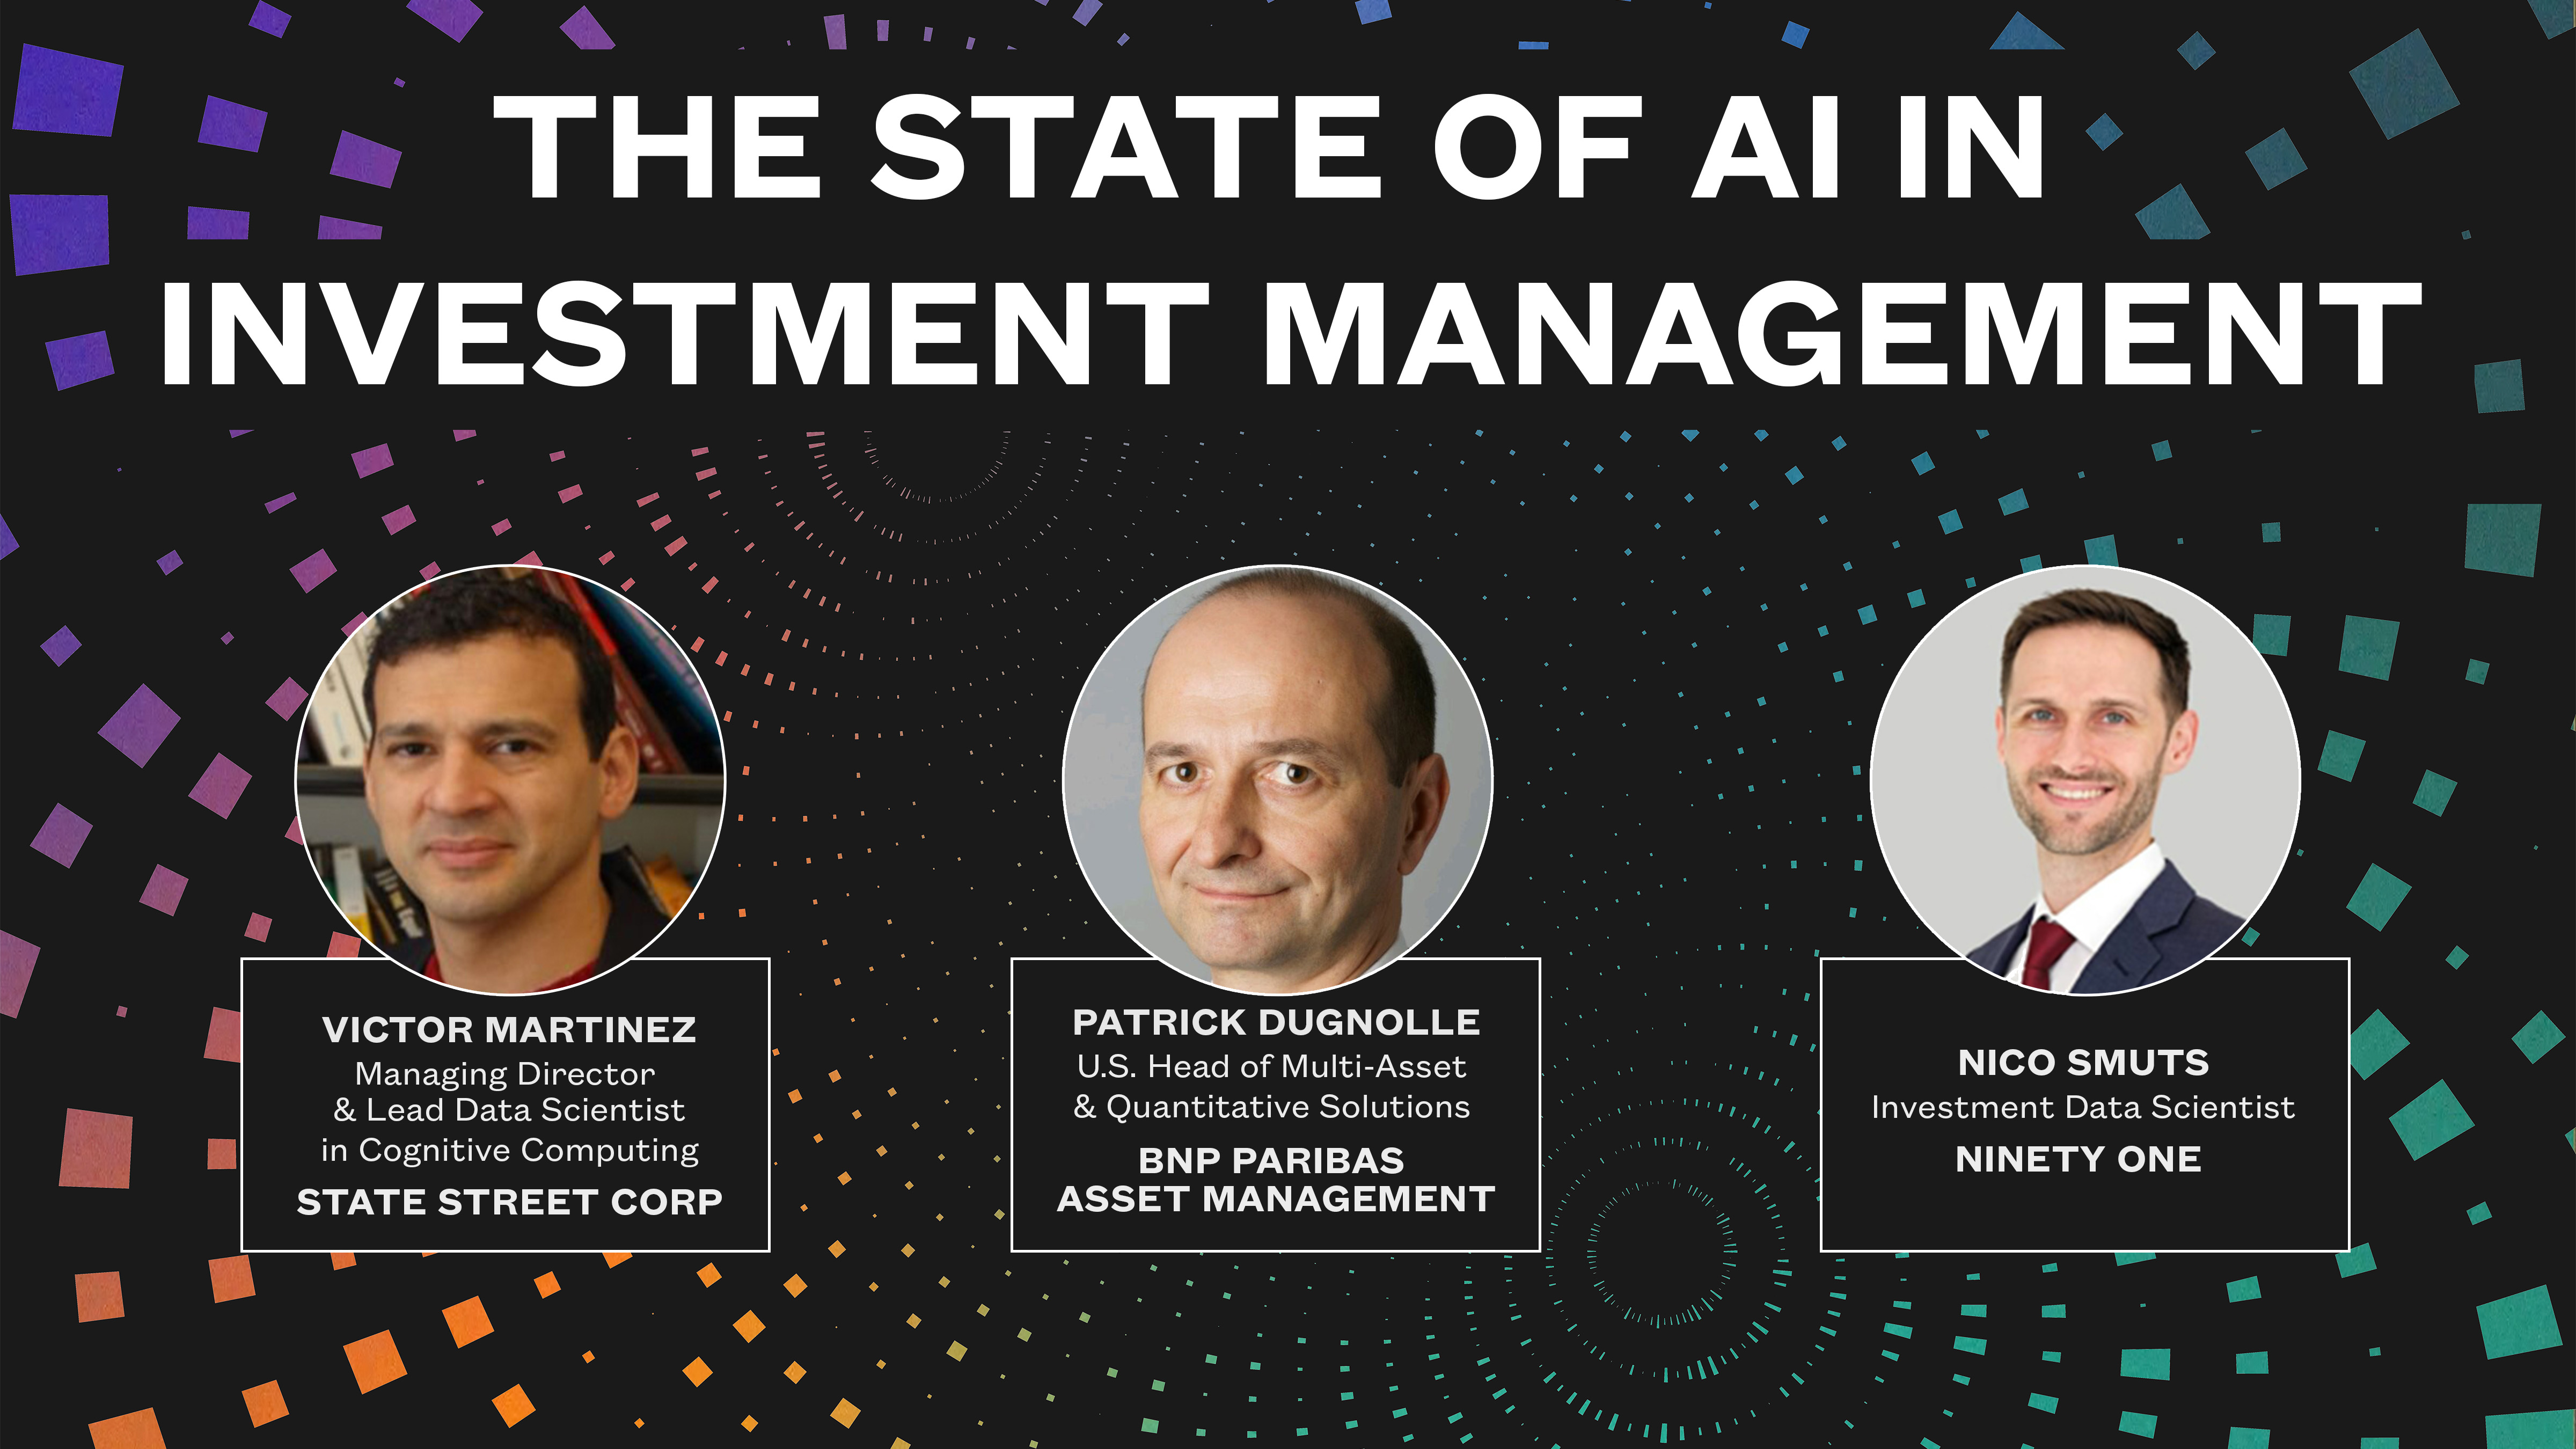 https://ai4.io/blog/2020/04/22/the-state-of-ai-in-investment-management/